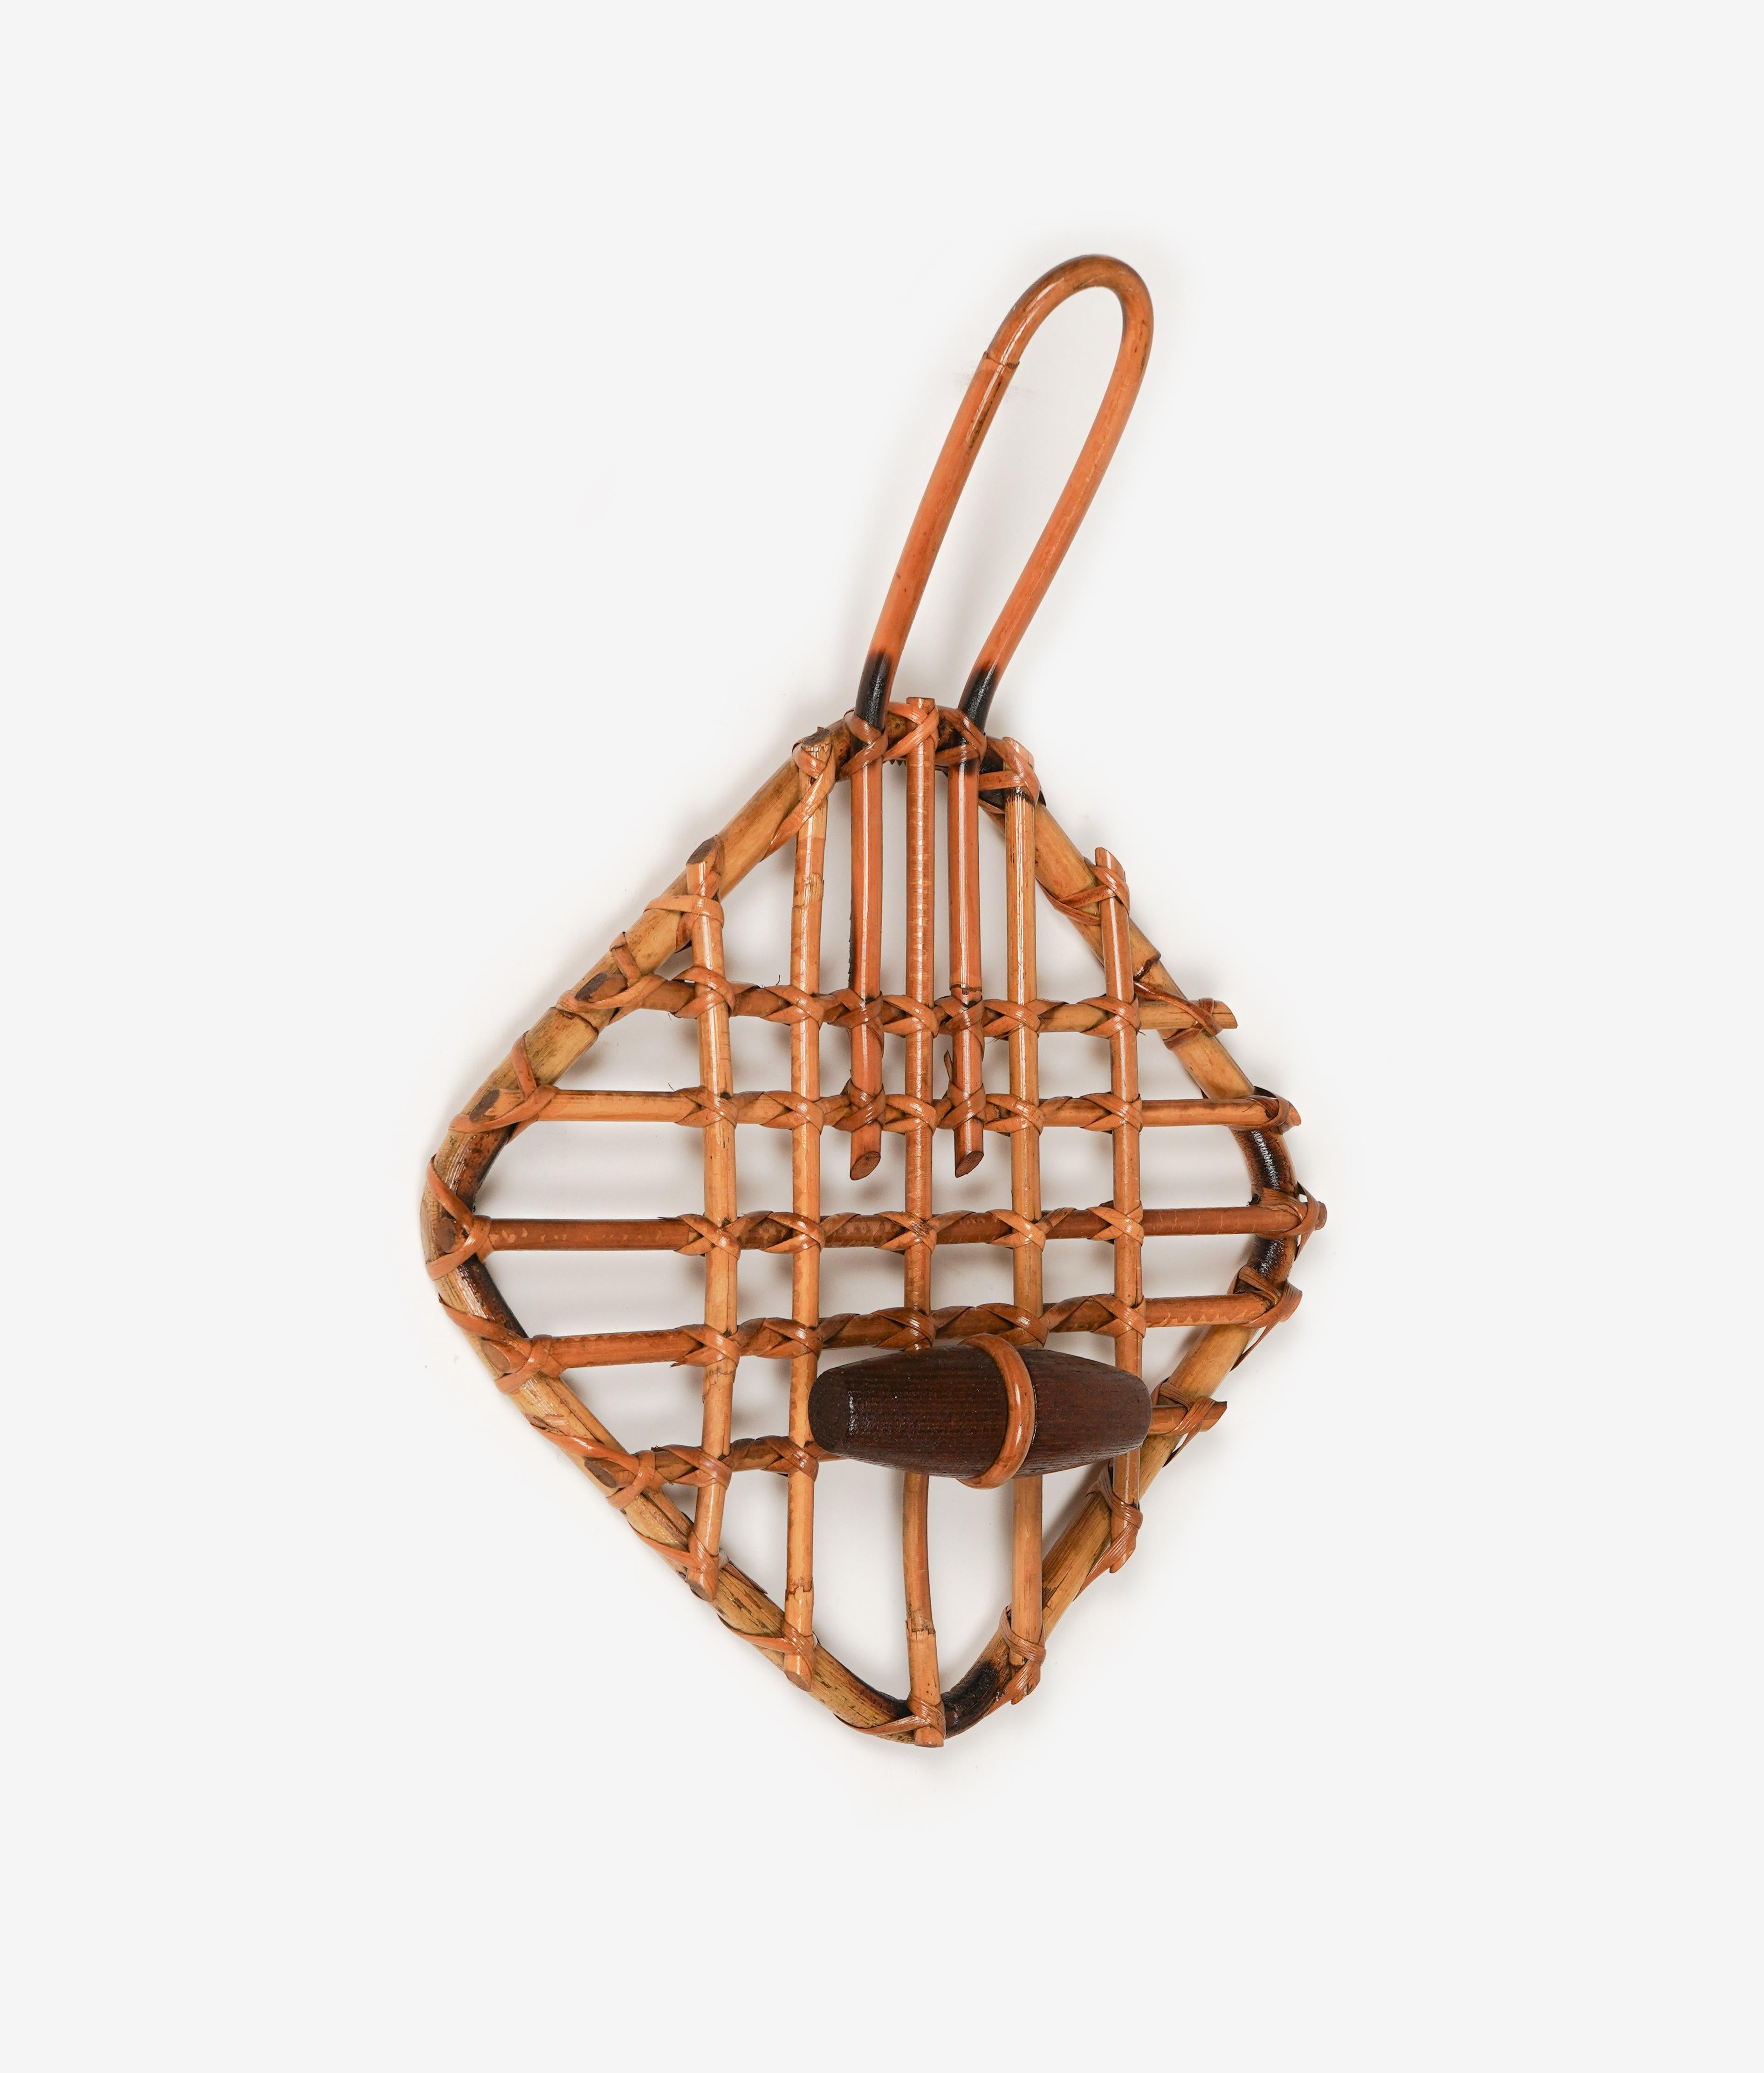 Single netting coat hanger in rattan by the designer Olaf von Bohr.

Made in Italy in the 1960s.

Bamboo / rattan has been polished by a professional restorer.